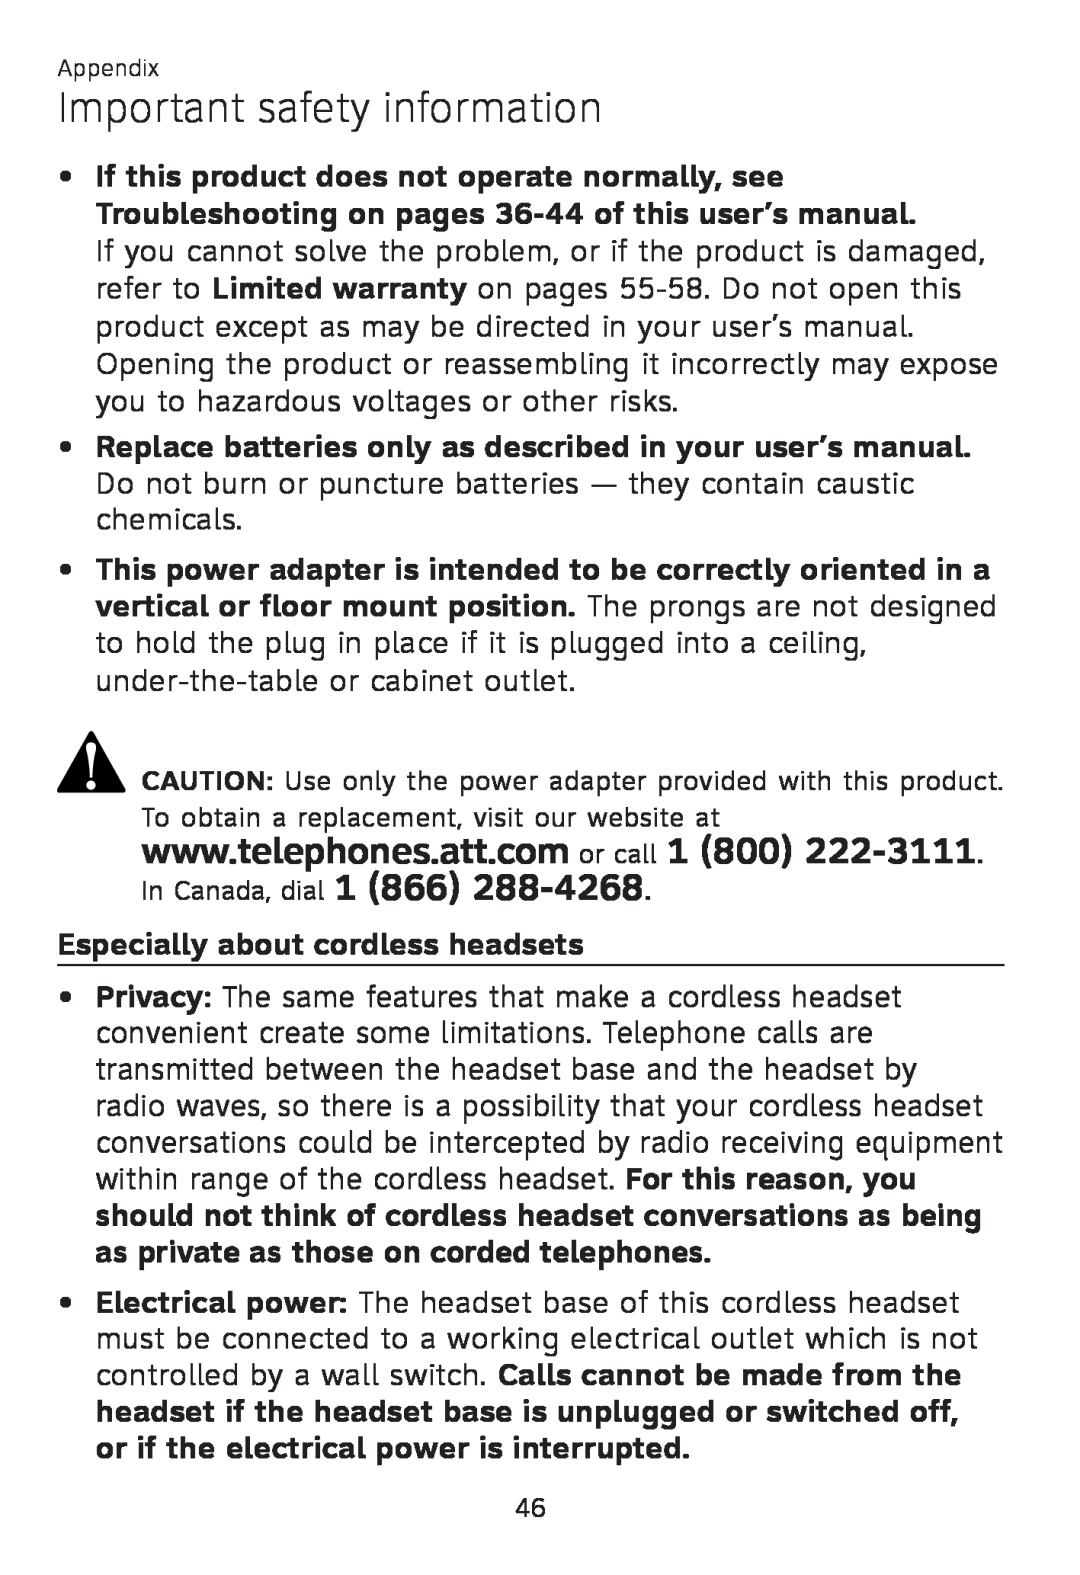 AT&T TL 7610 user manual Especially about cordless headsets, Important safety information 